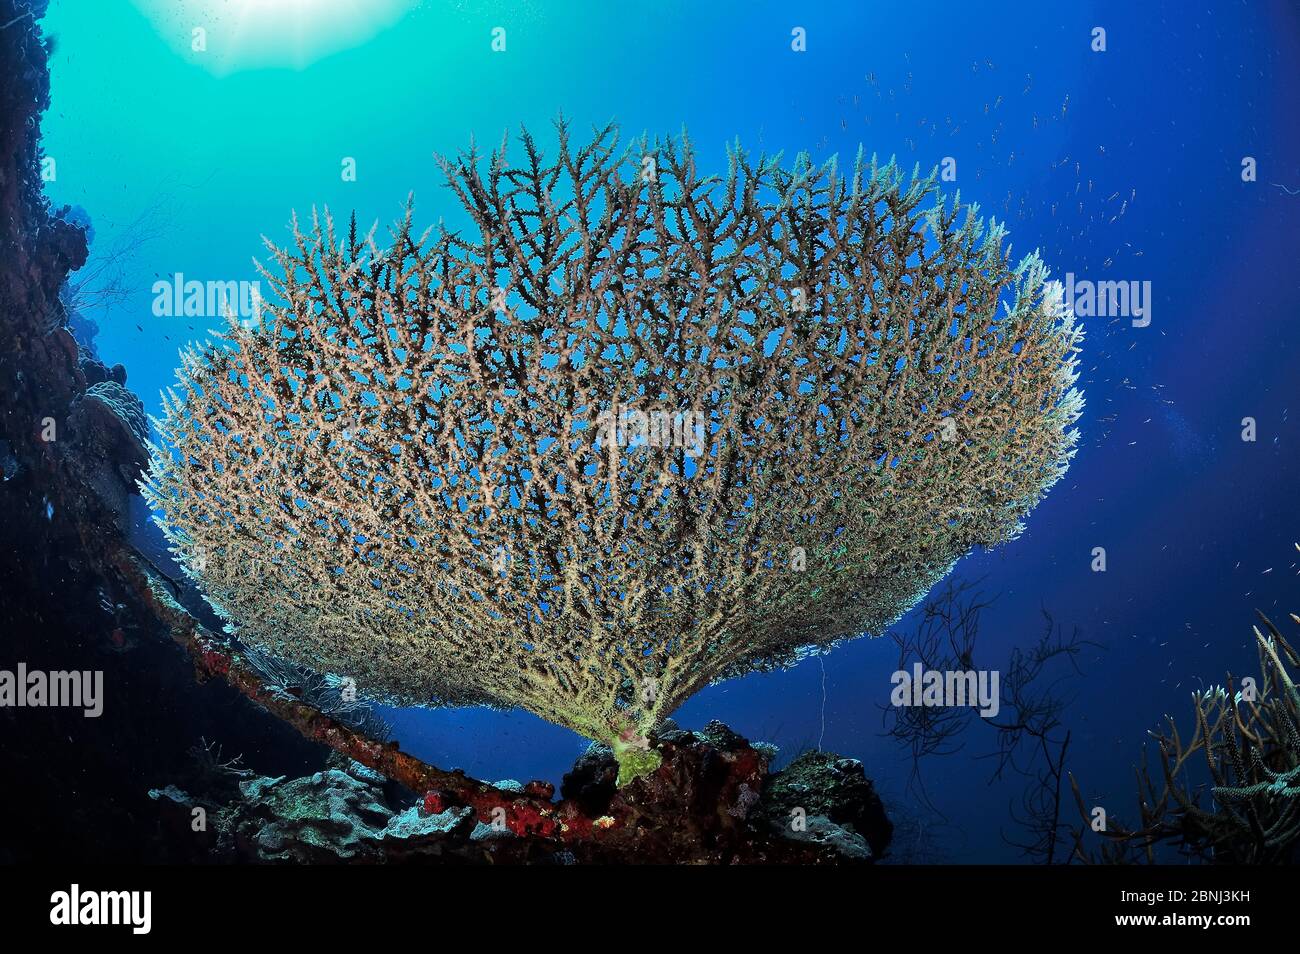 Hard coral table (Acroporidae) on the wreck of the Techio Maru a Japanese cargoship sunk in 1944 during World War II, Palau, Philippine Sea Stock Photo